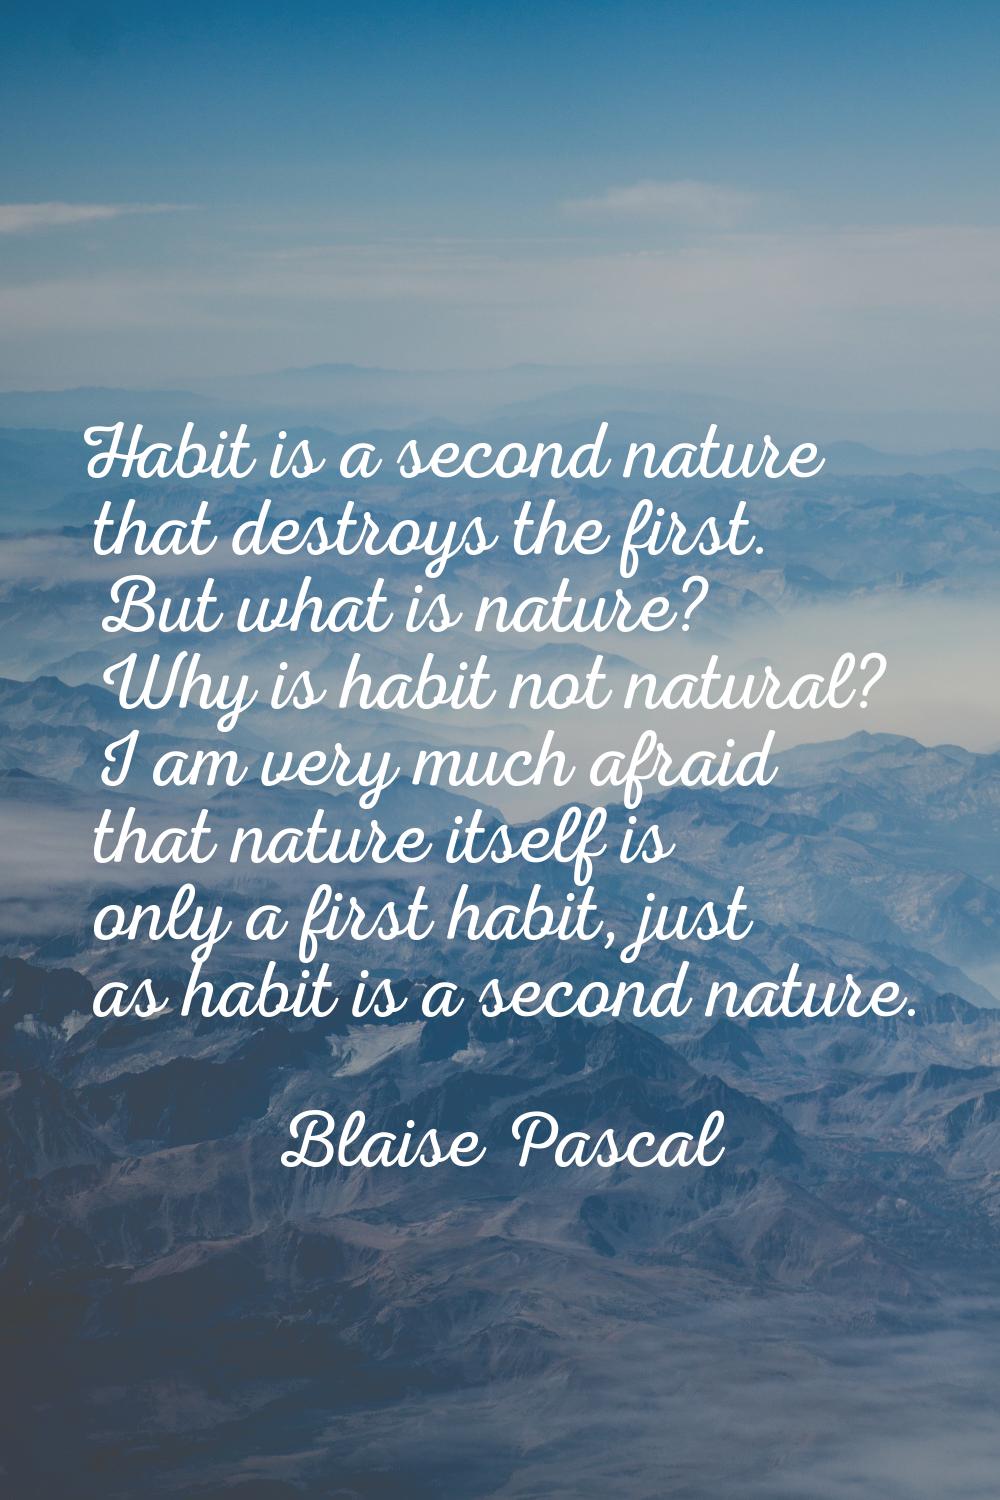 Habit is a second nature that destroys the first. But what is nature? Why is habit not natural? I a